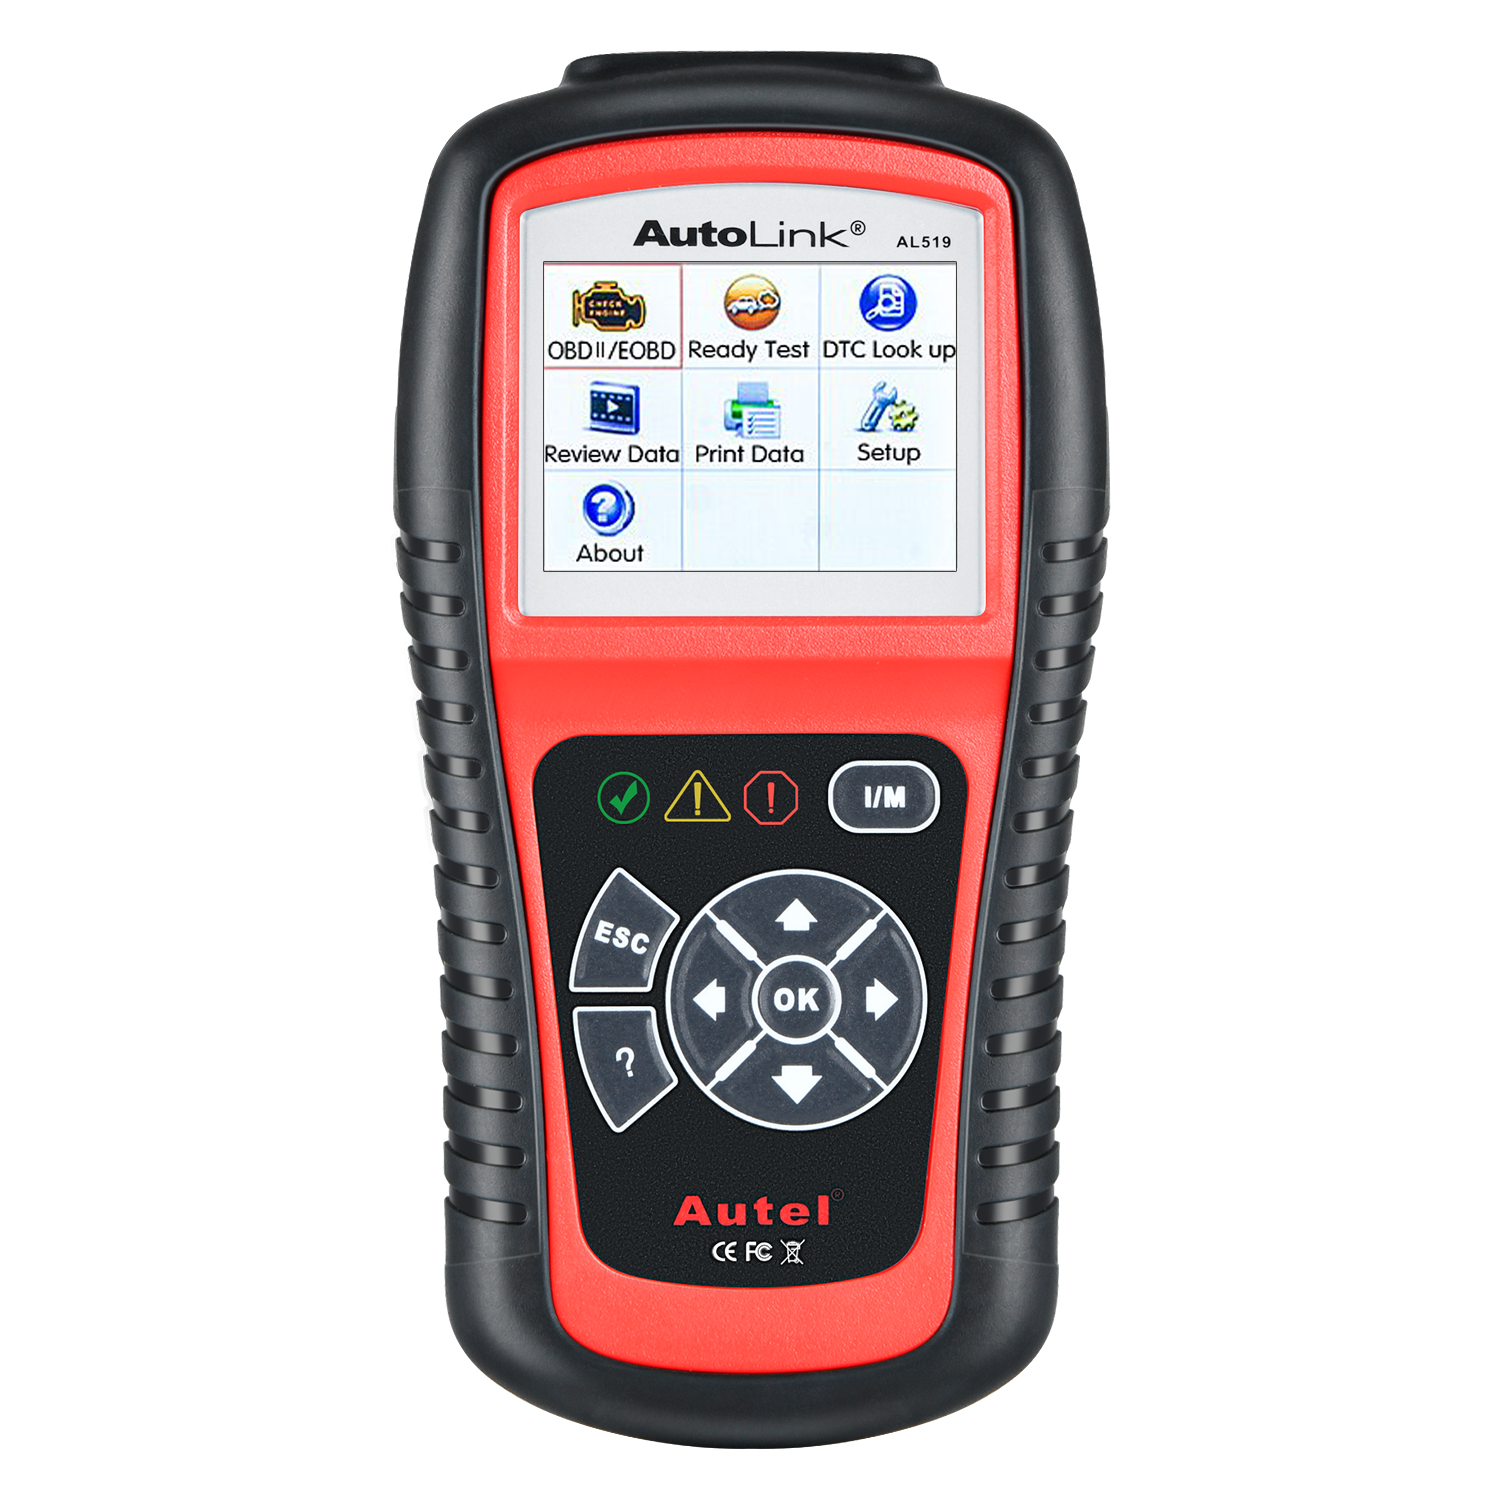  Autel OBD2 Scanner MS309 Universal Car Engine Fault Code  Reader, Check Engine Light and Emission Monitor Status, OBDII CAN  Diagnostic Scan Tool : Automotive